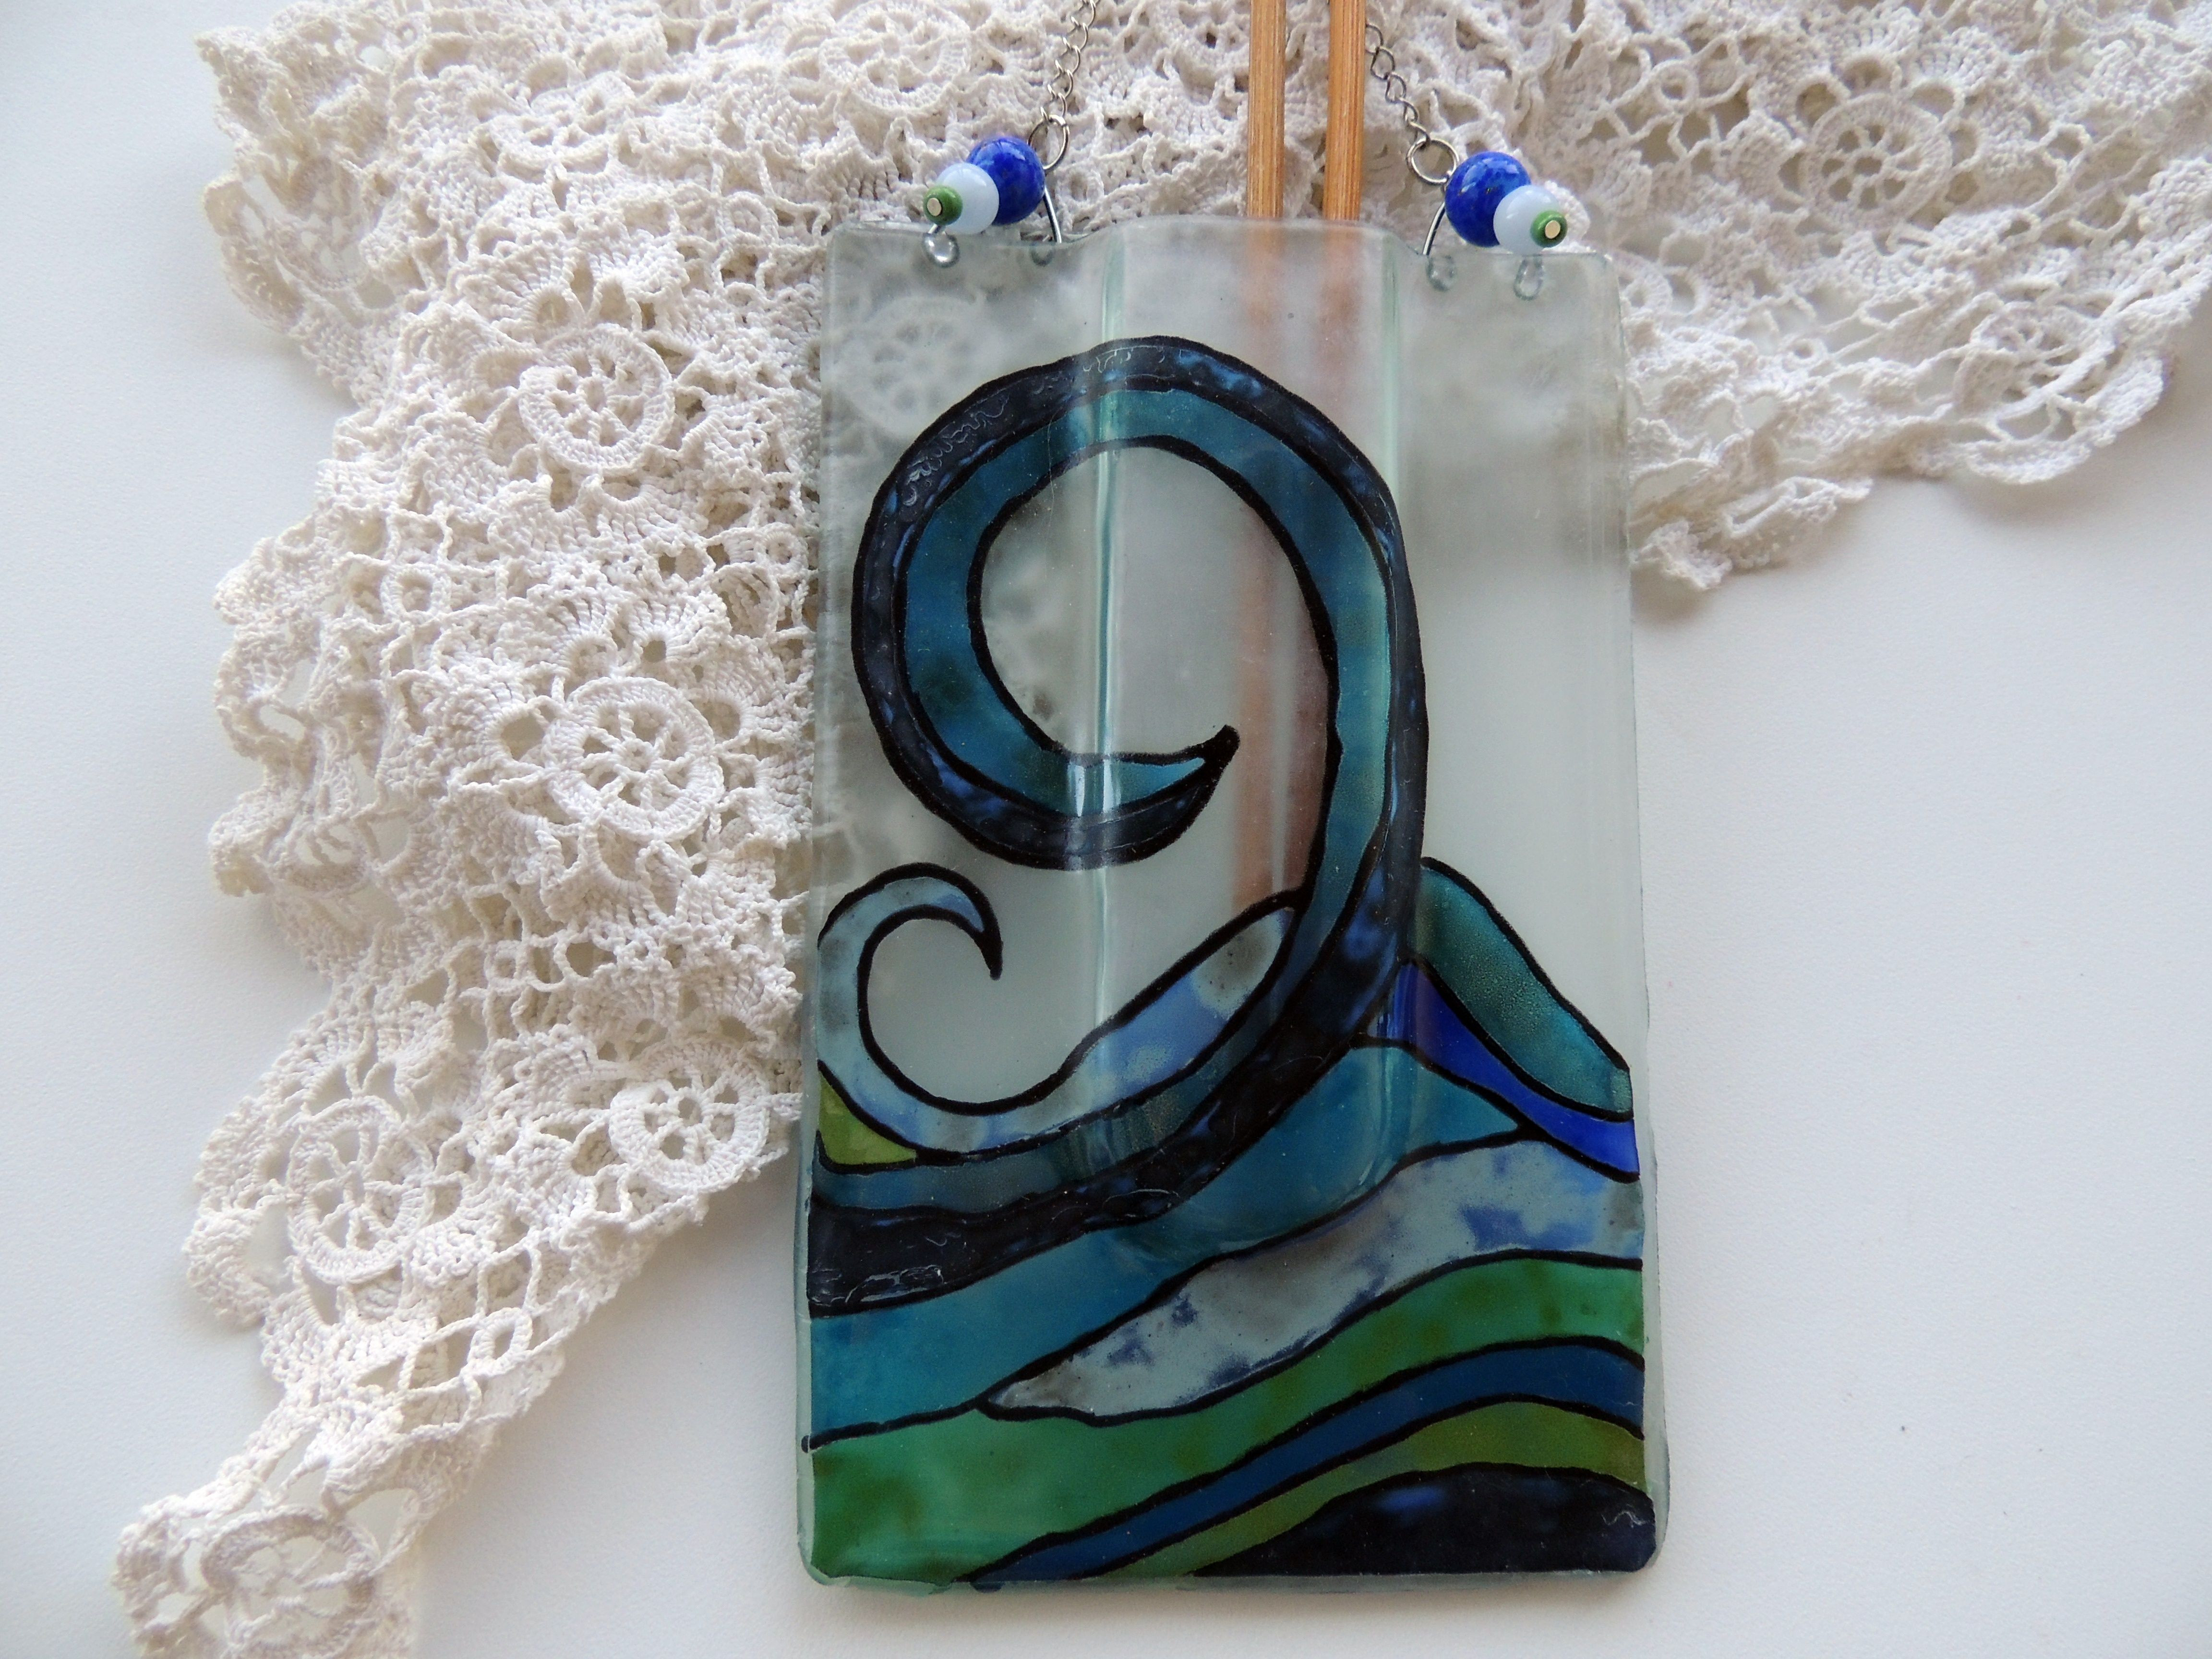 24 Awesome Square Glass Wall Vase 2023 free download square glass wall vase of fused glass pocket vasepainted fused vasepainted wall vasewall pertaining to fused glass pocket vasepainted fused vasepainted wall vasewall painted sea